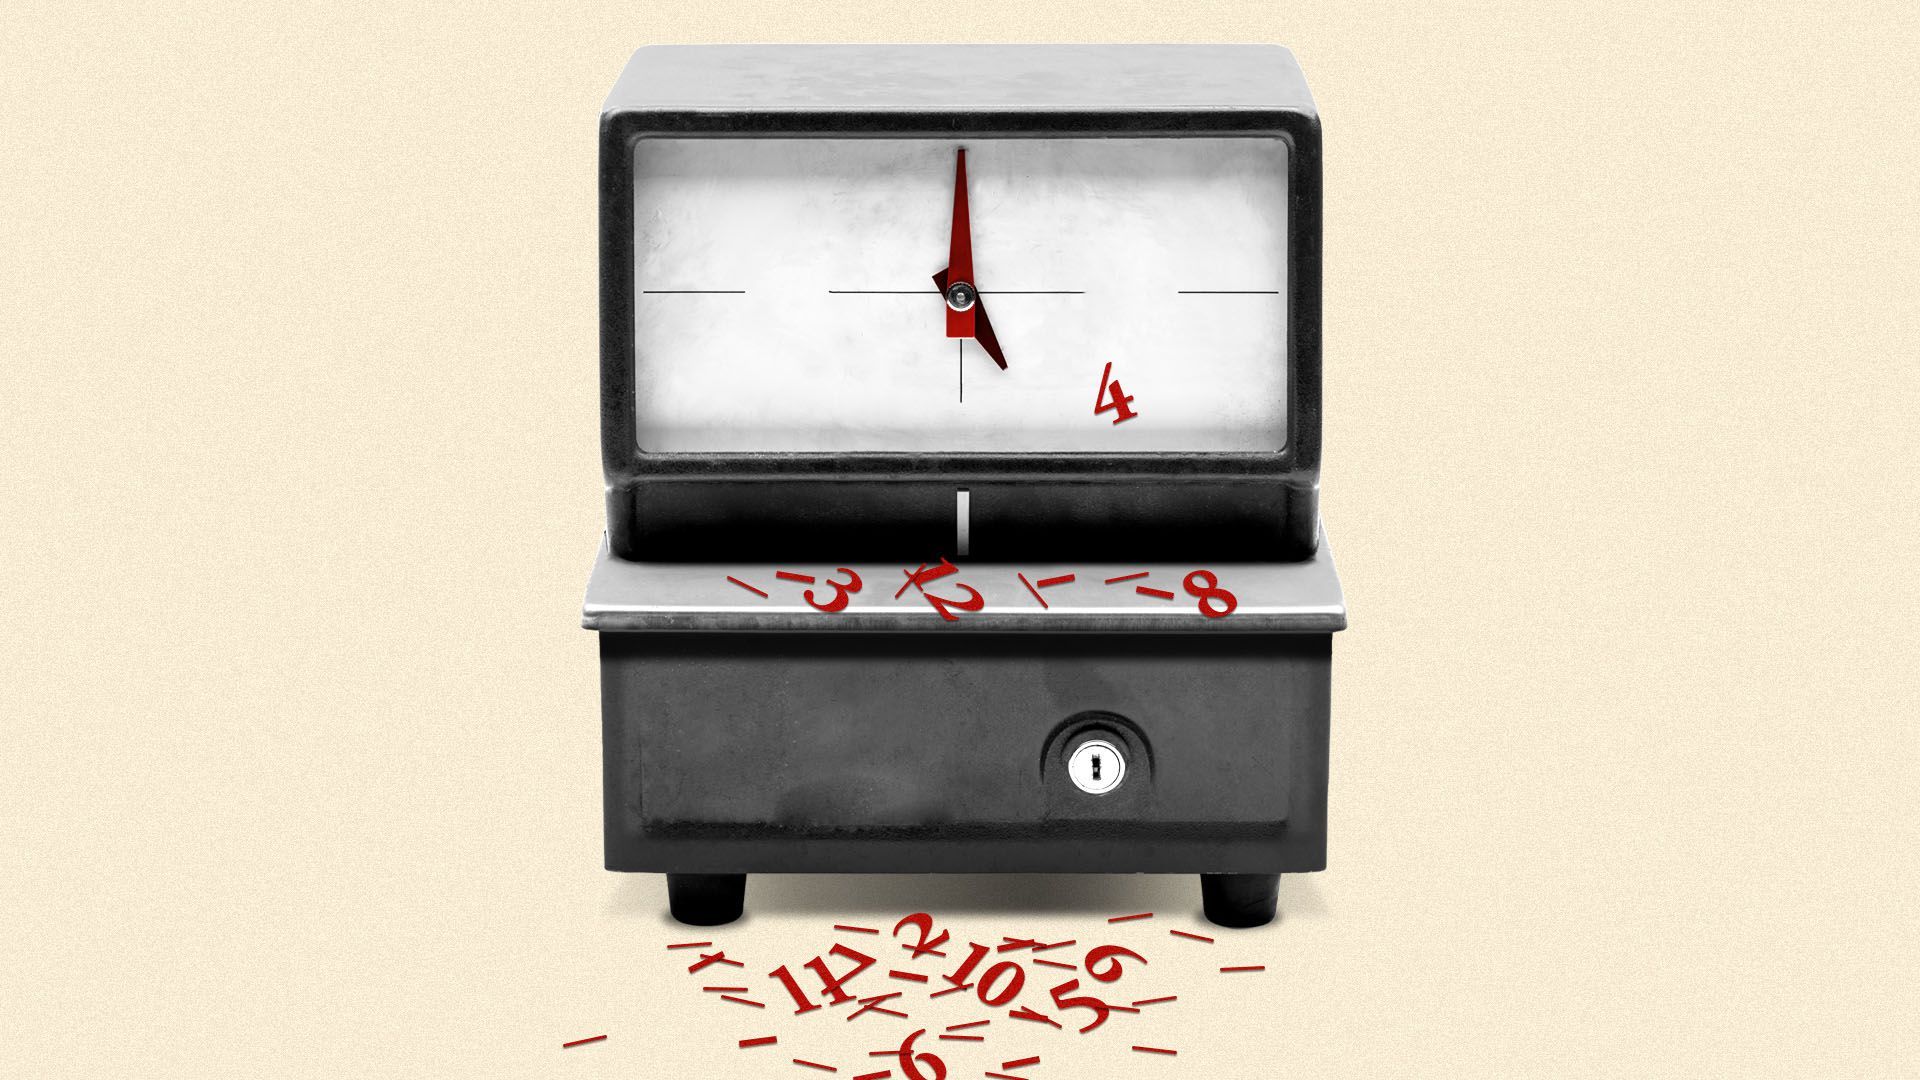 Illustration of a time clock with the numbers and line elements fallen off